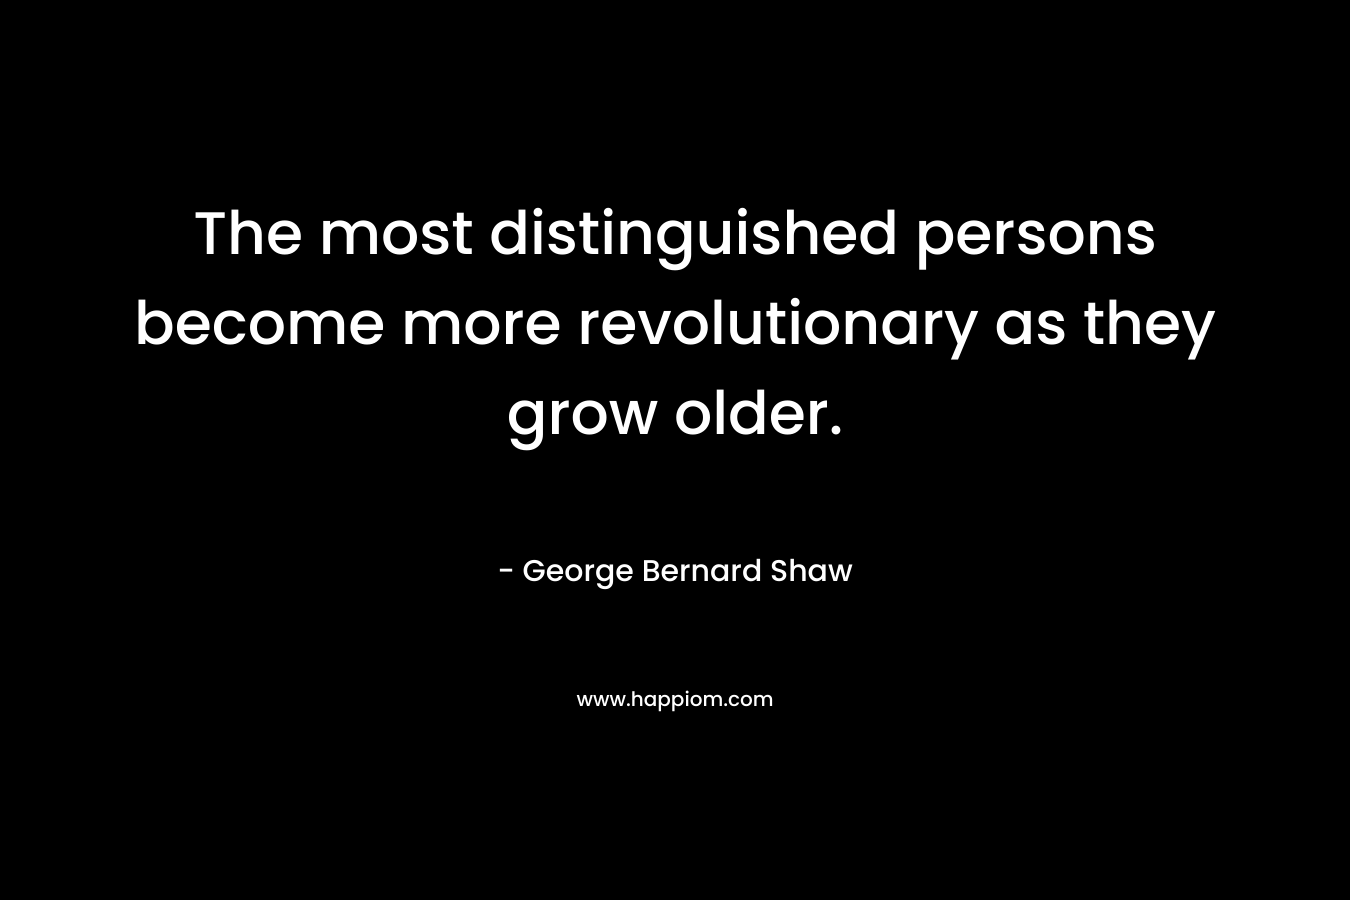 The most distinguished persons become more revolutionary as they grow older. – George Bernard Shaw